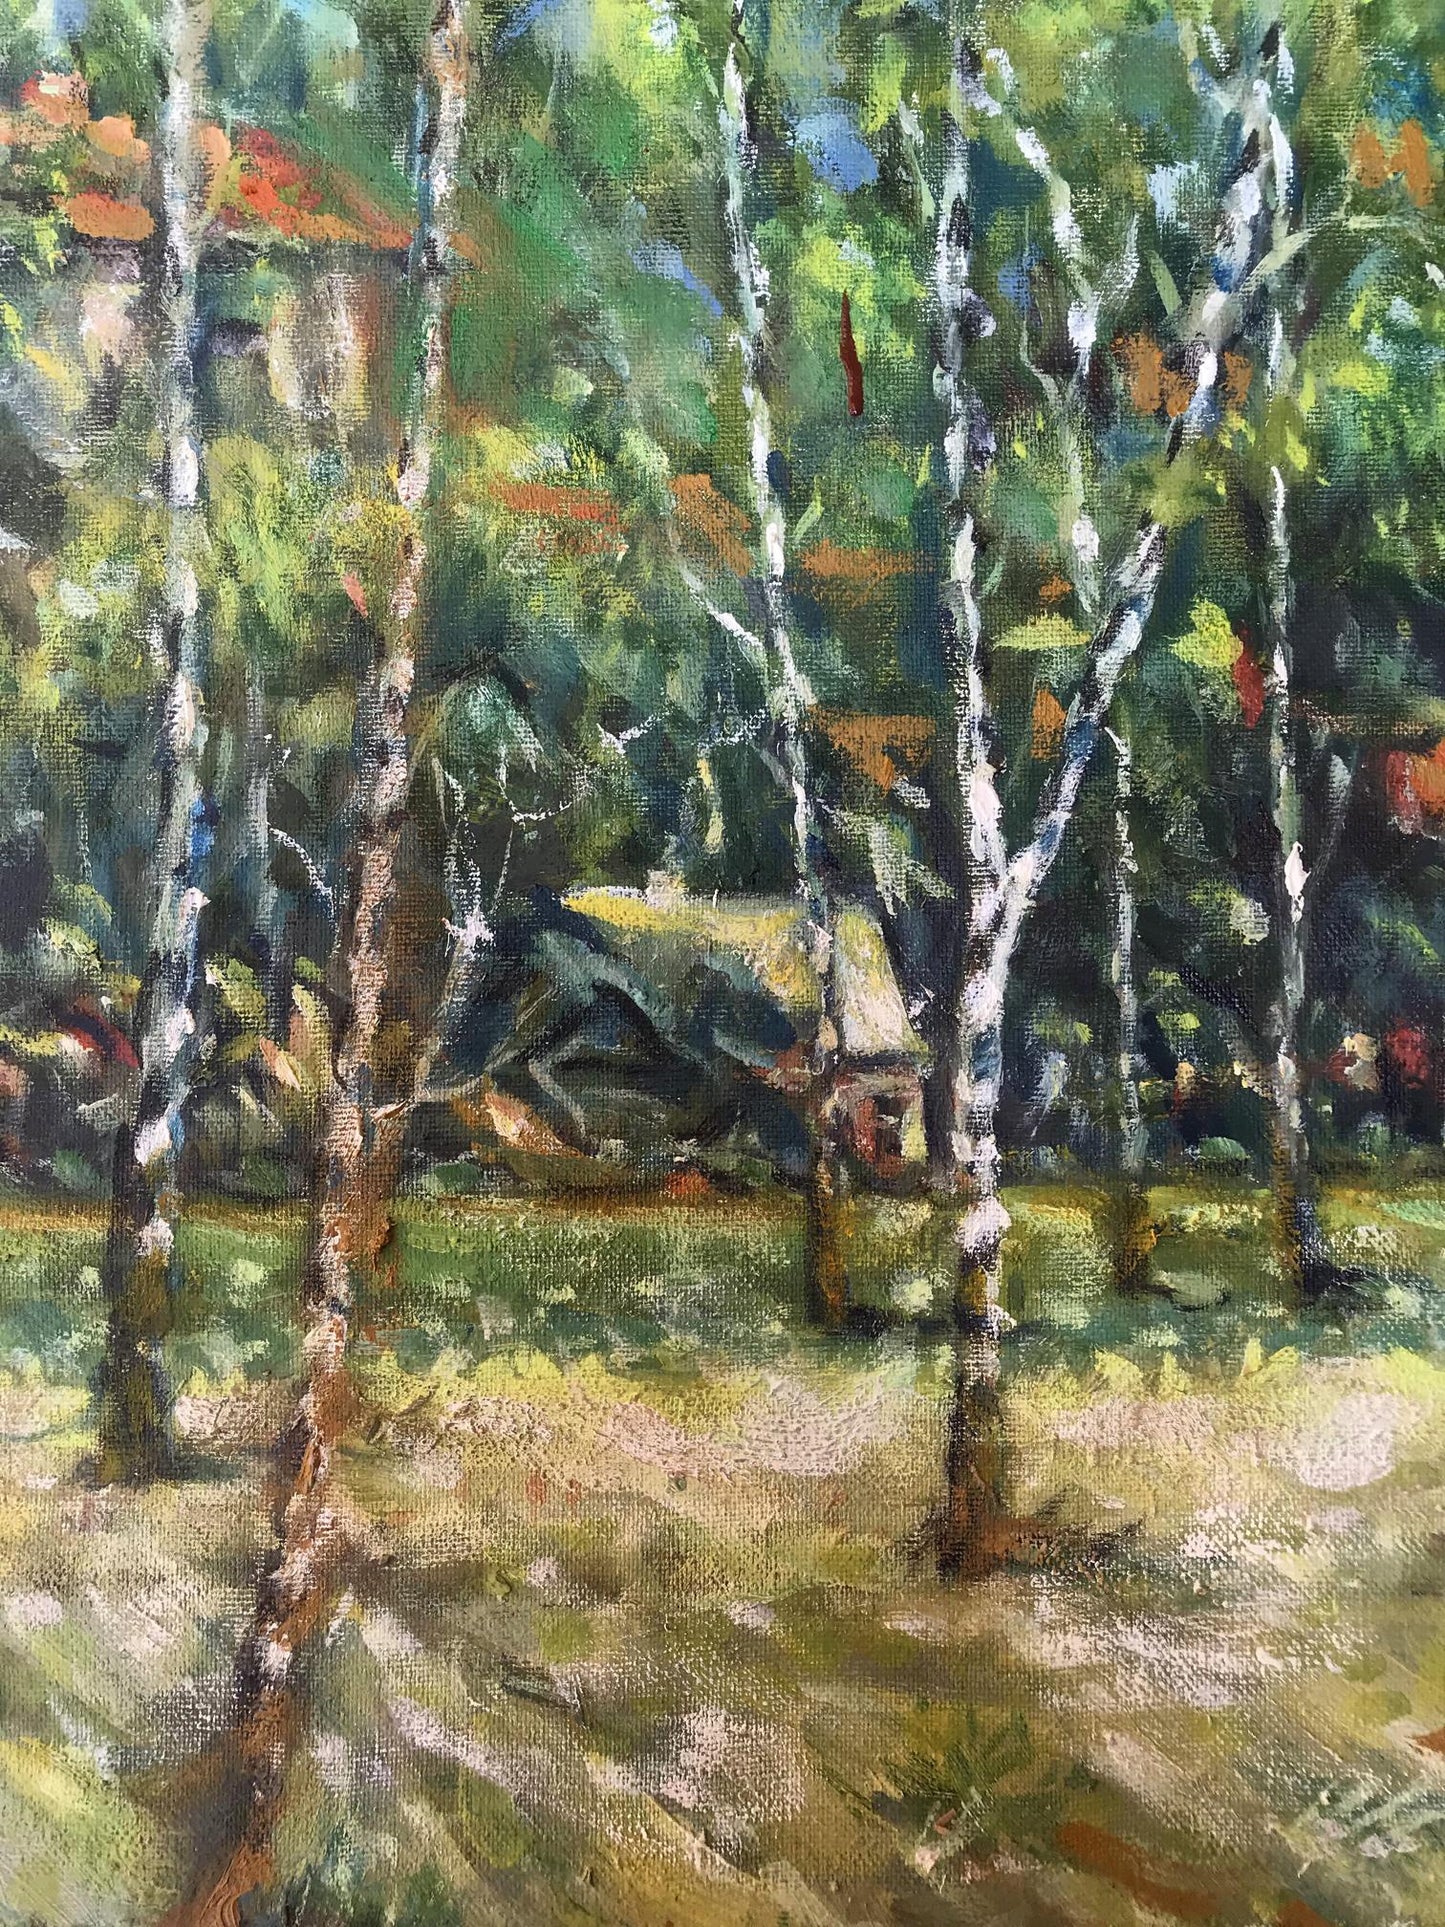 The oil painting by Ivan Leontyevich Shapoval brings the charm of Sumy's birches to the canvas